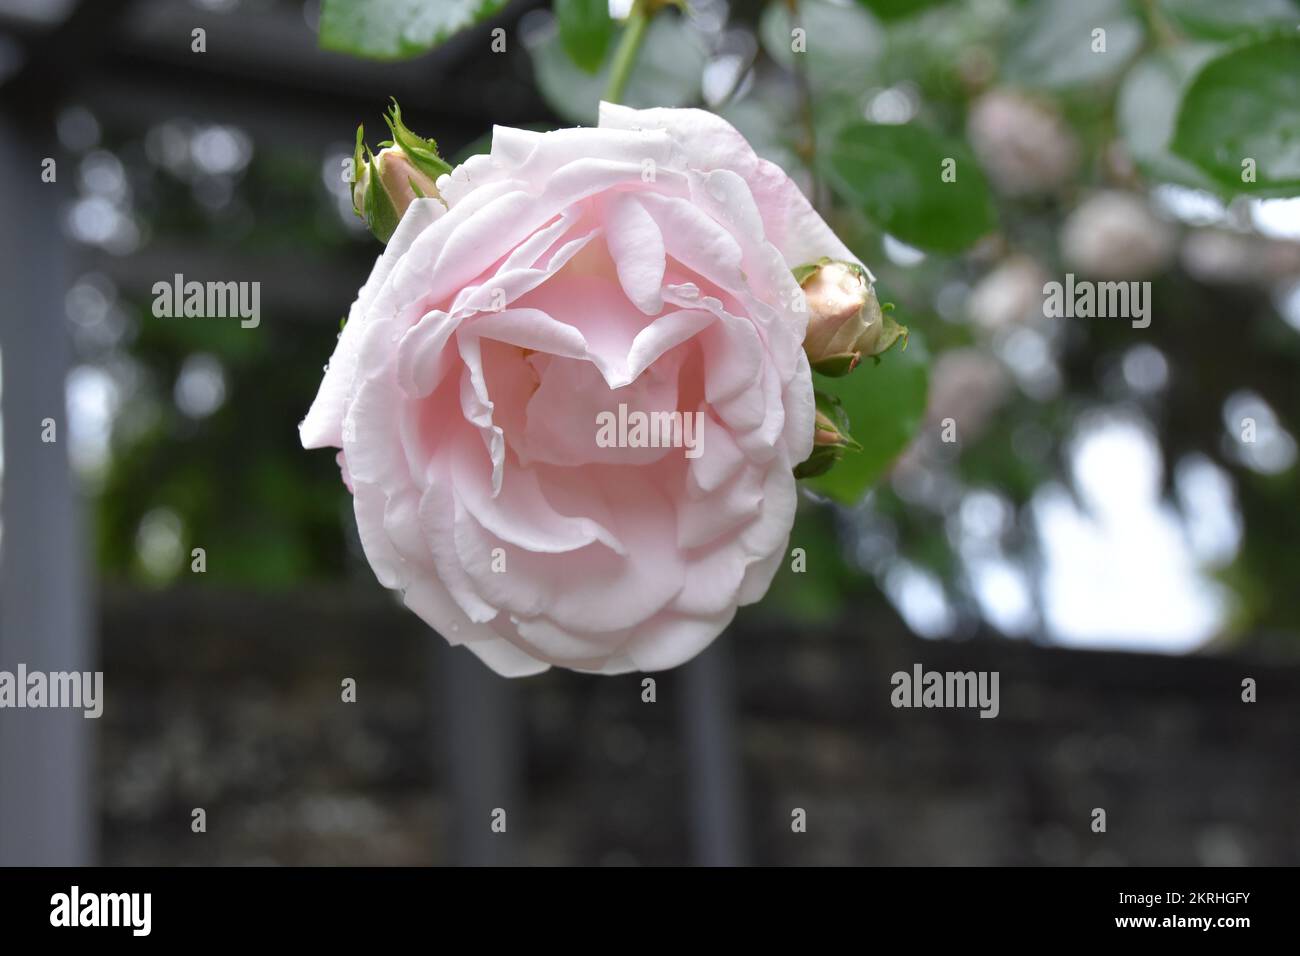 Rose flower in full blossom. It is close up view and on background there are some more defocused roses. Stock Photo